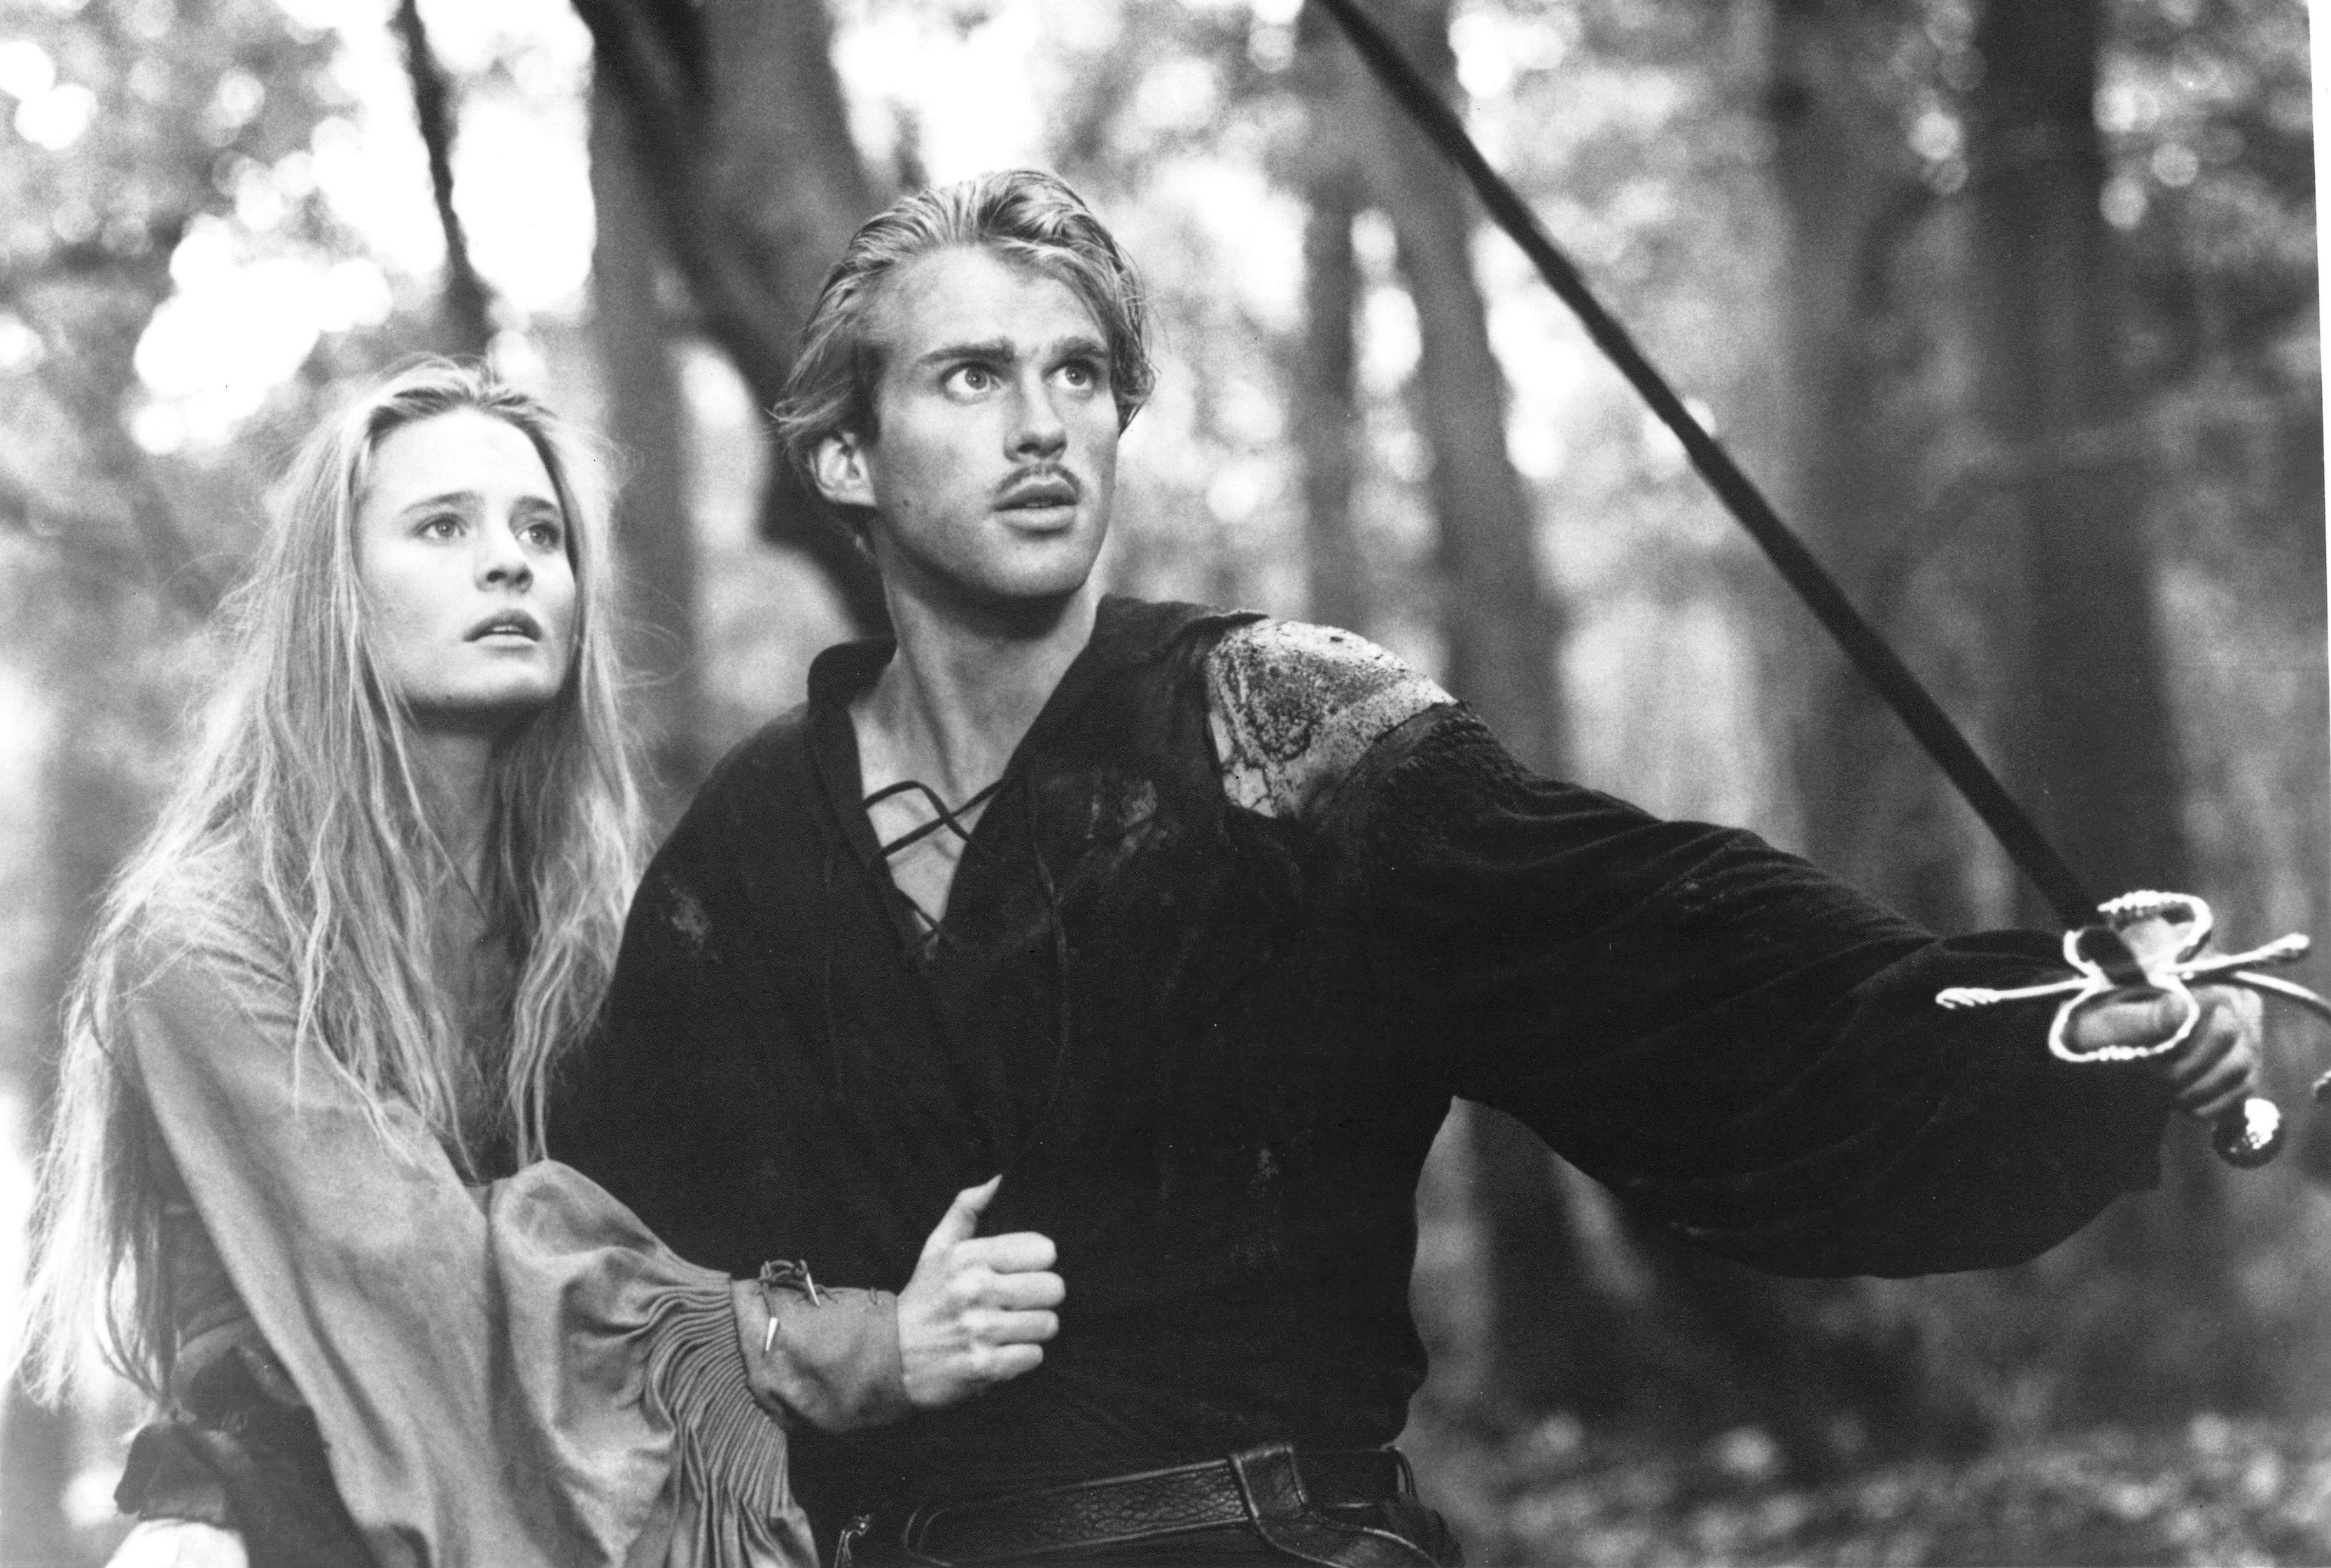 Westley (Cary Elwes) defends Princess Buttercup (Robin Wright) from Prince Humperdink’s henchman in "The Princess Bride." (20th Century Fox)